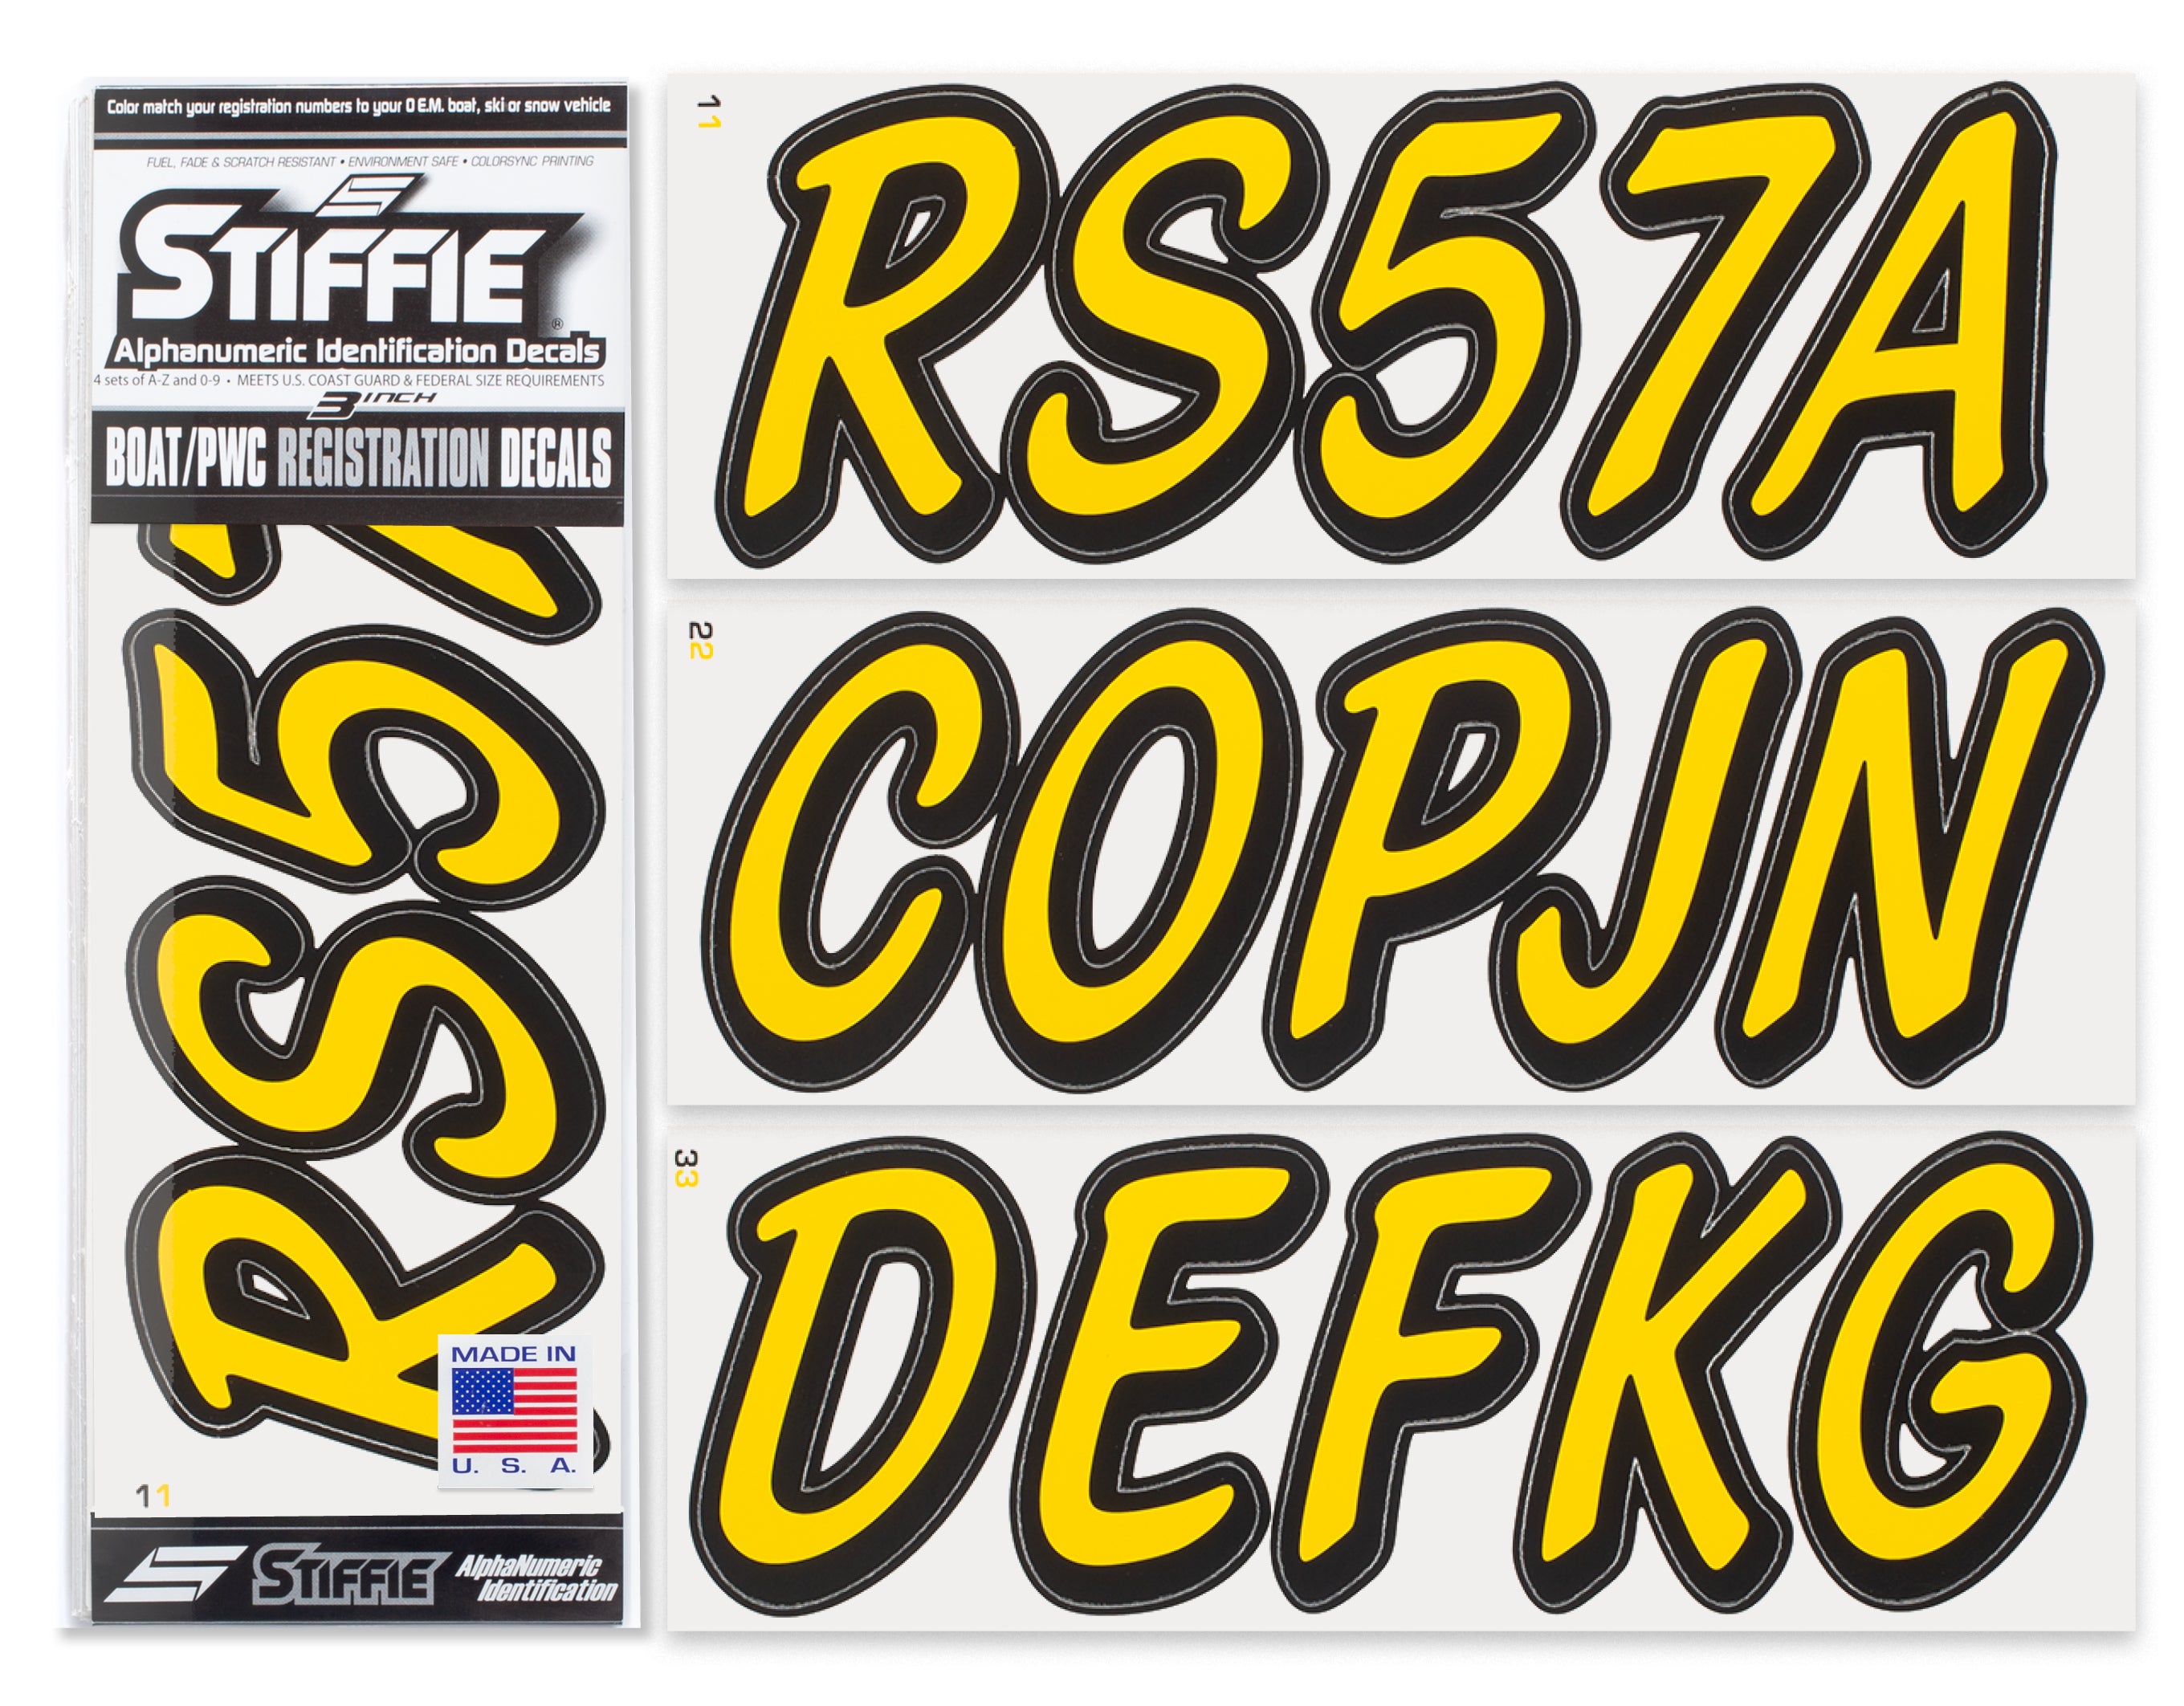 STIFFIE Whipline Solid Yellow/Black 3" Alpha-Numeric Registration Identification Numbers Stickers Decals for Boats & Personal Watercraft